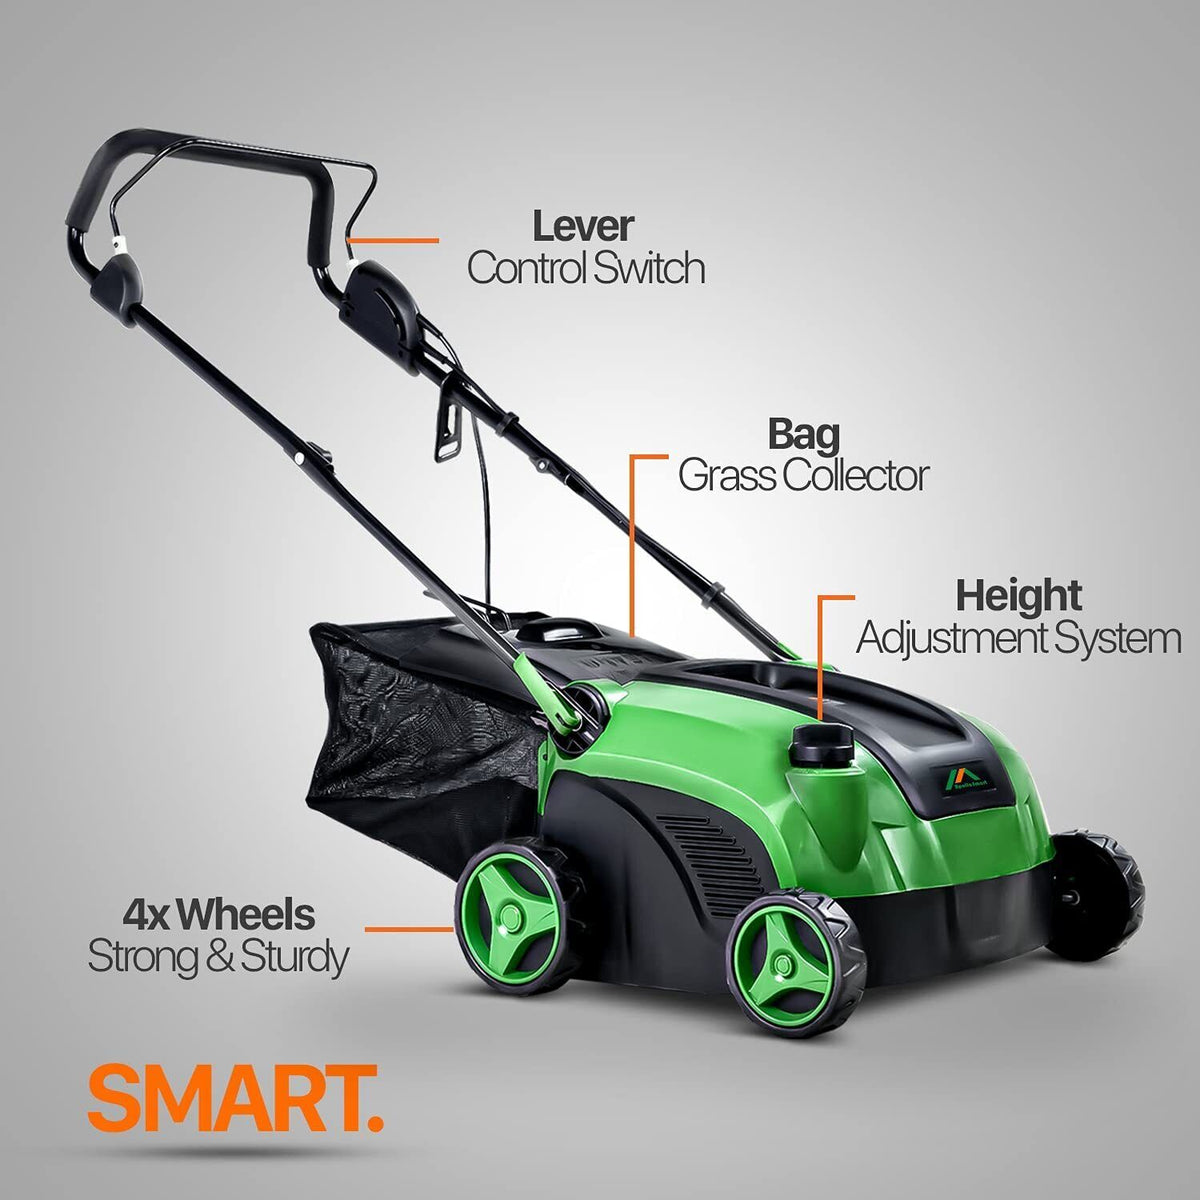 Apollo Smart GUT089 2 in 1 Walk Behind Scarifier Lawn Dethatcher Raker Corded Electric 120V 12 Amp 15" with Collection Bag New